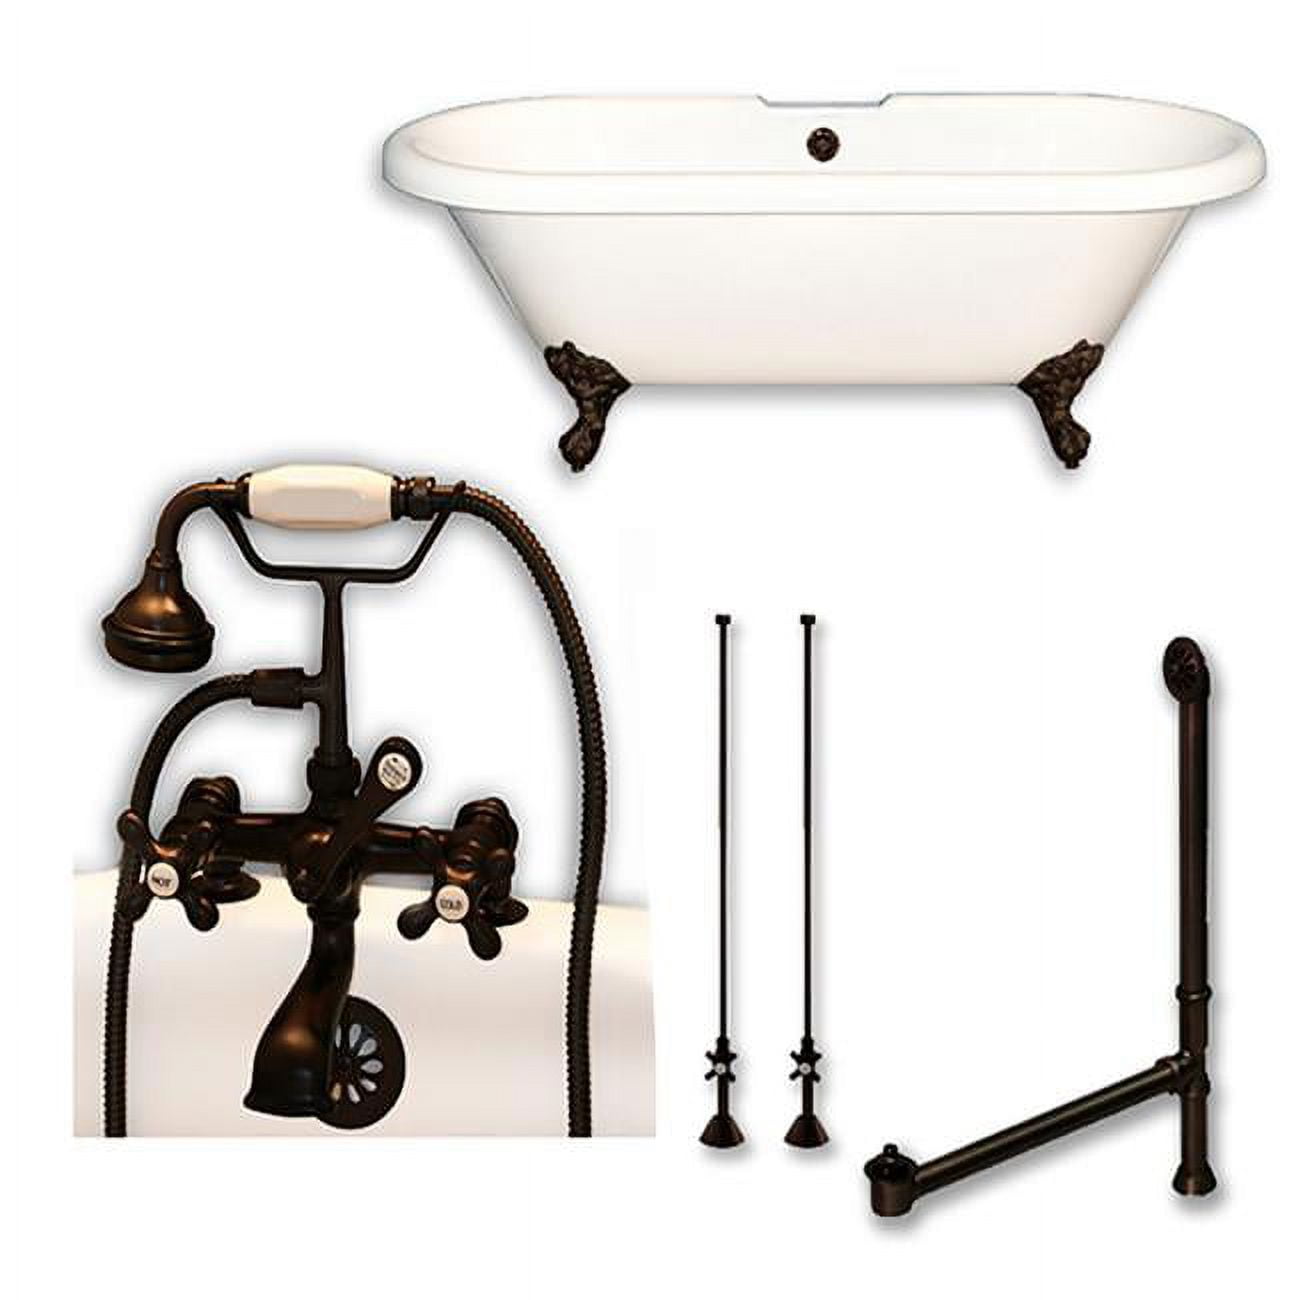 60 X 30 In. Acrylic Double Ended Clawfoot Bathtub With 7 In. Deck Mount Faucet Drillings & Oil Rubbed Bronze Plumbing Double Ended Tub With Classic